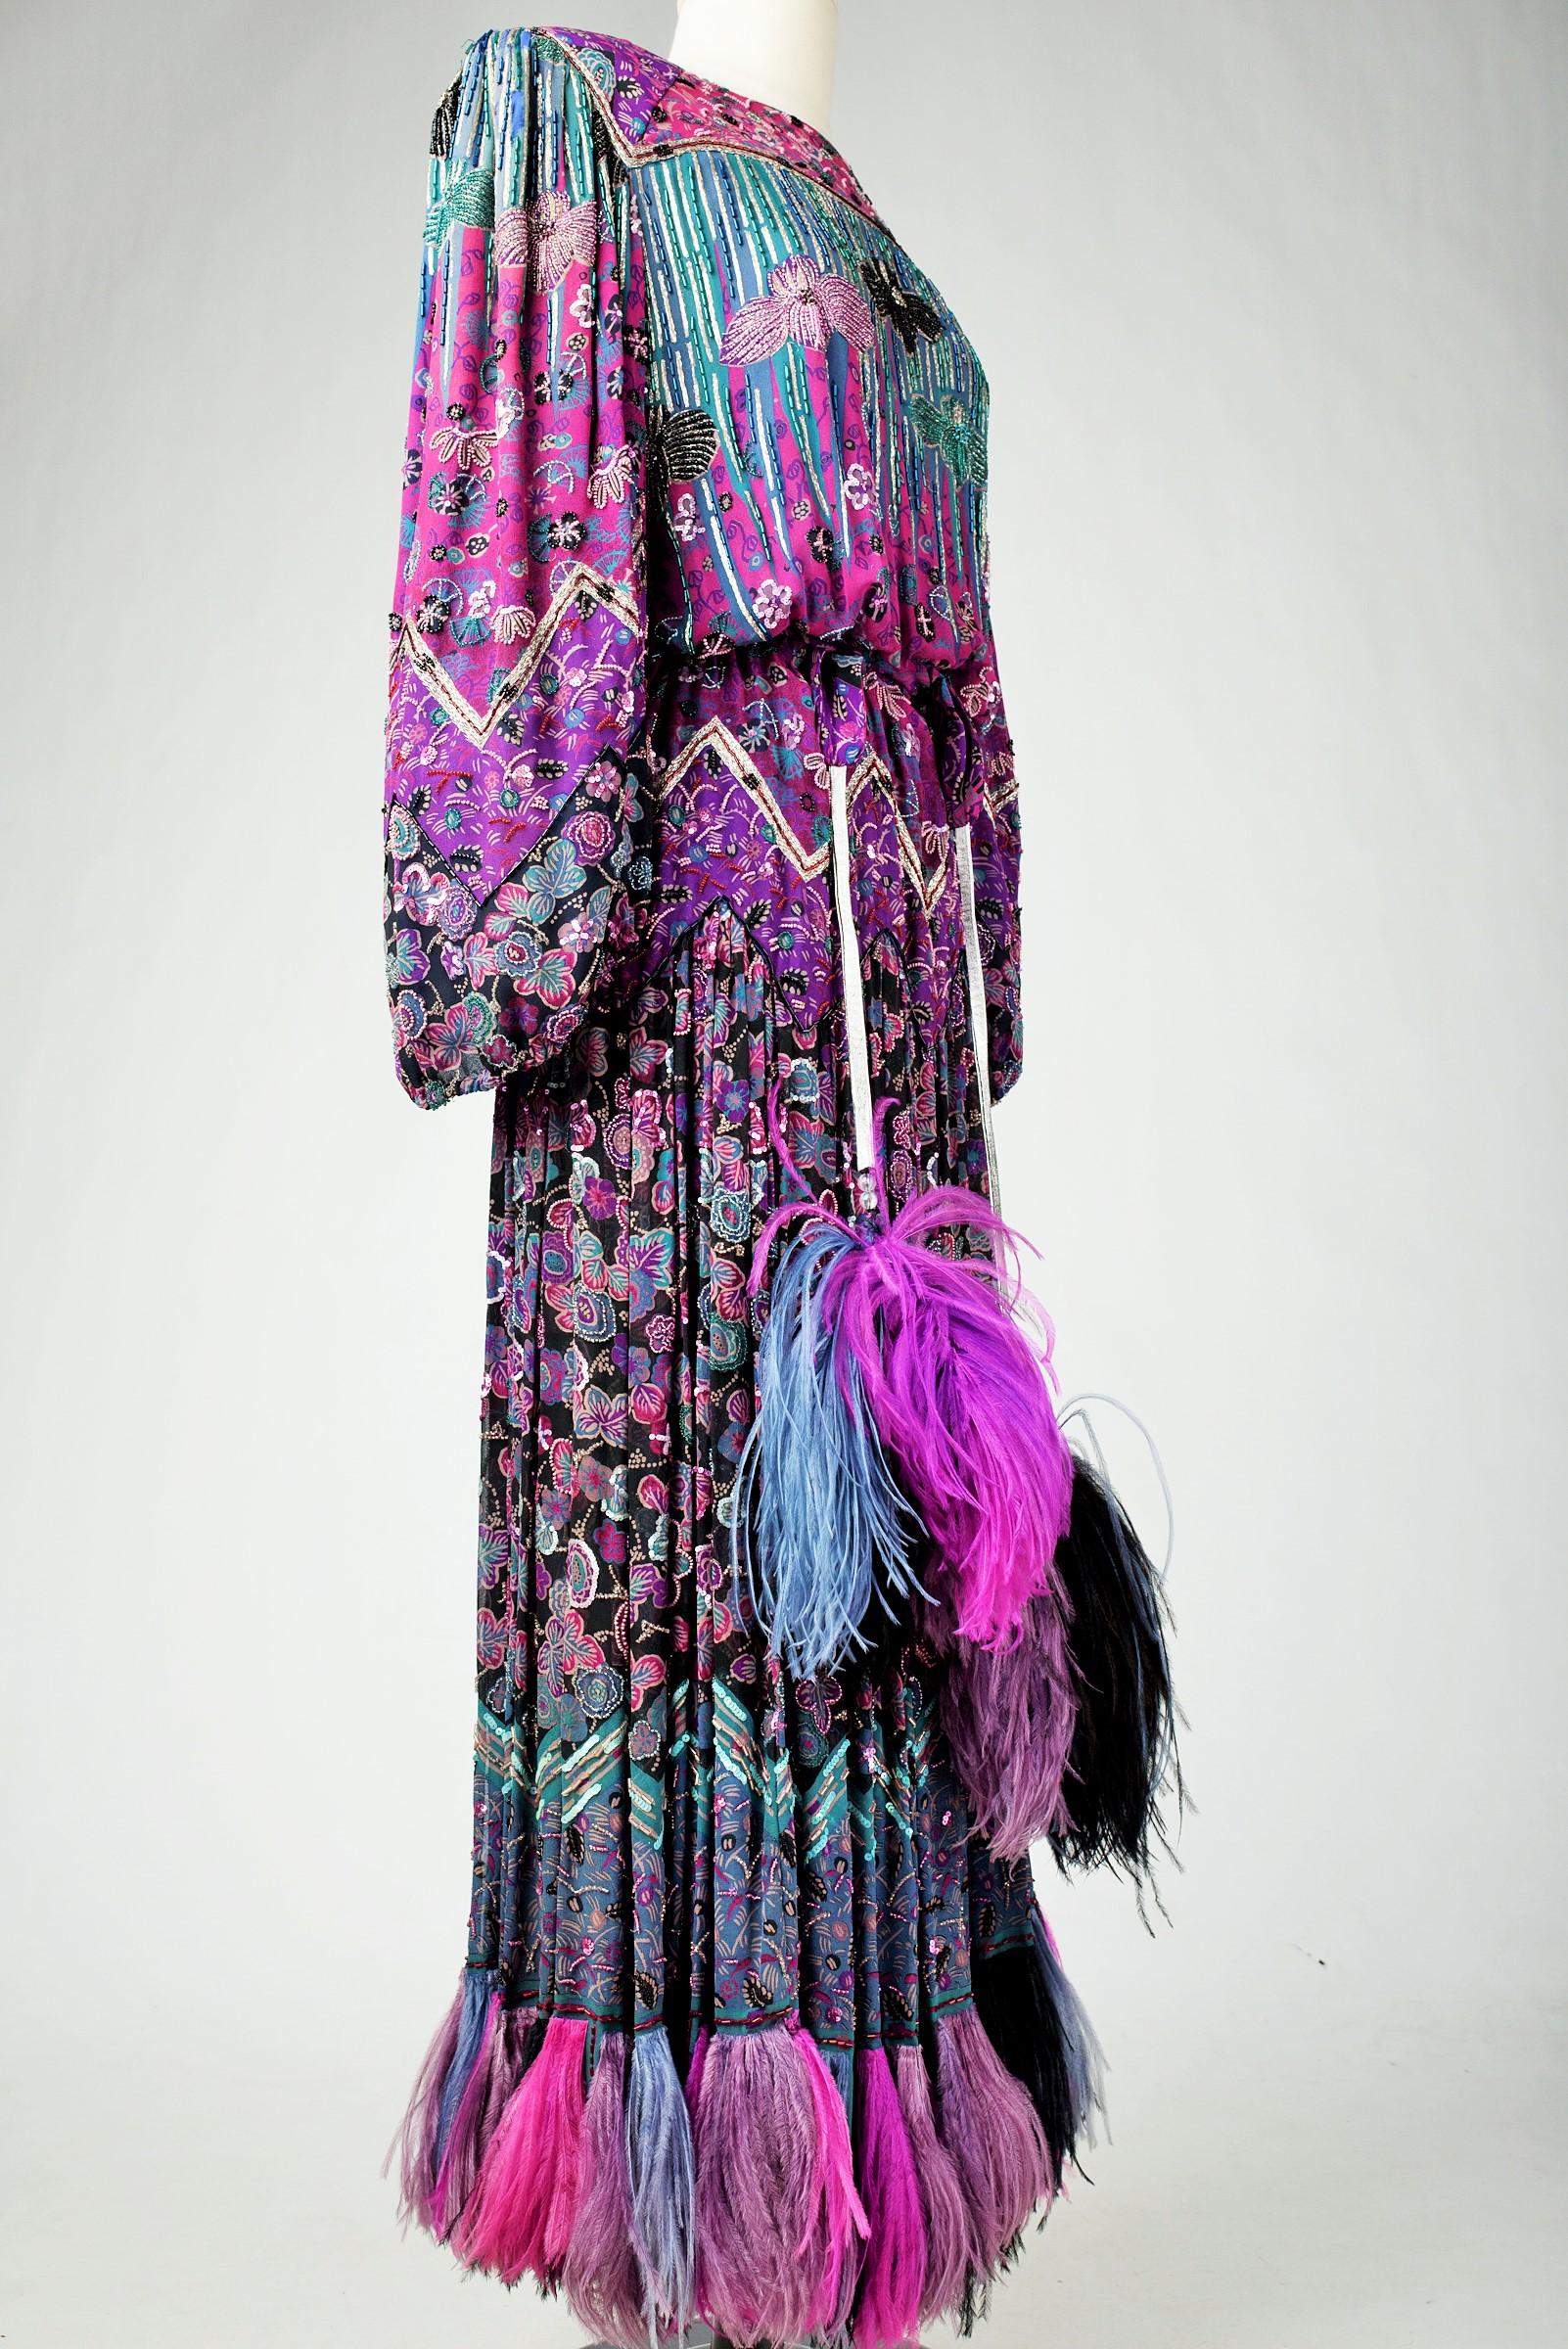 Fall Winter 1981-1982 Collection

France

Amazing evening dress in embroidered silk chiffon by Louis Féraud Haute Couture from the 1981-1982 collection. Loose blousante dress with puffed sleeves and epaulets, in silk chiffon densely embroidered with